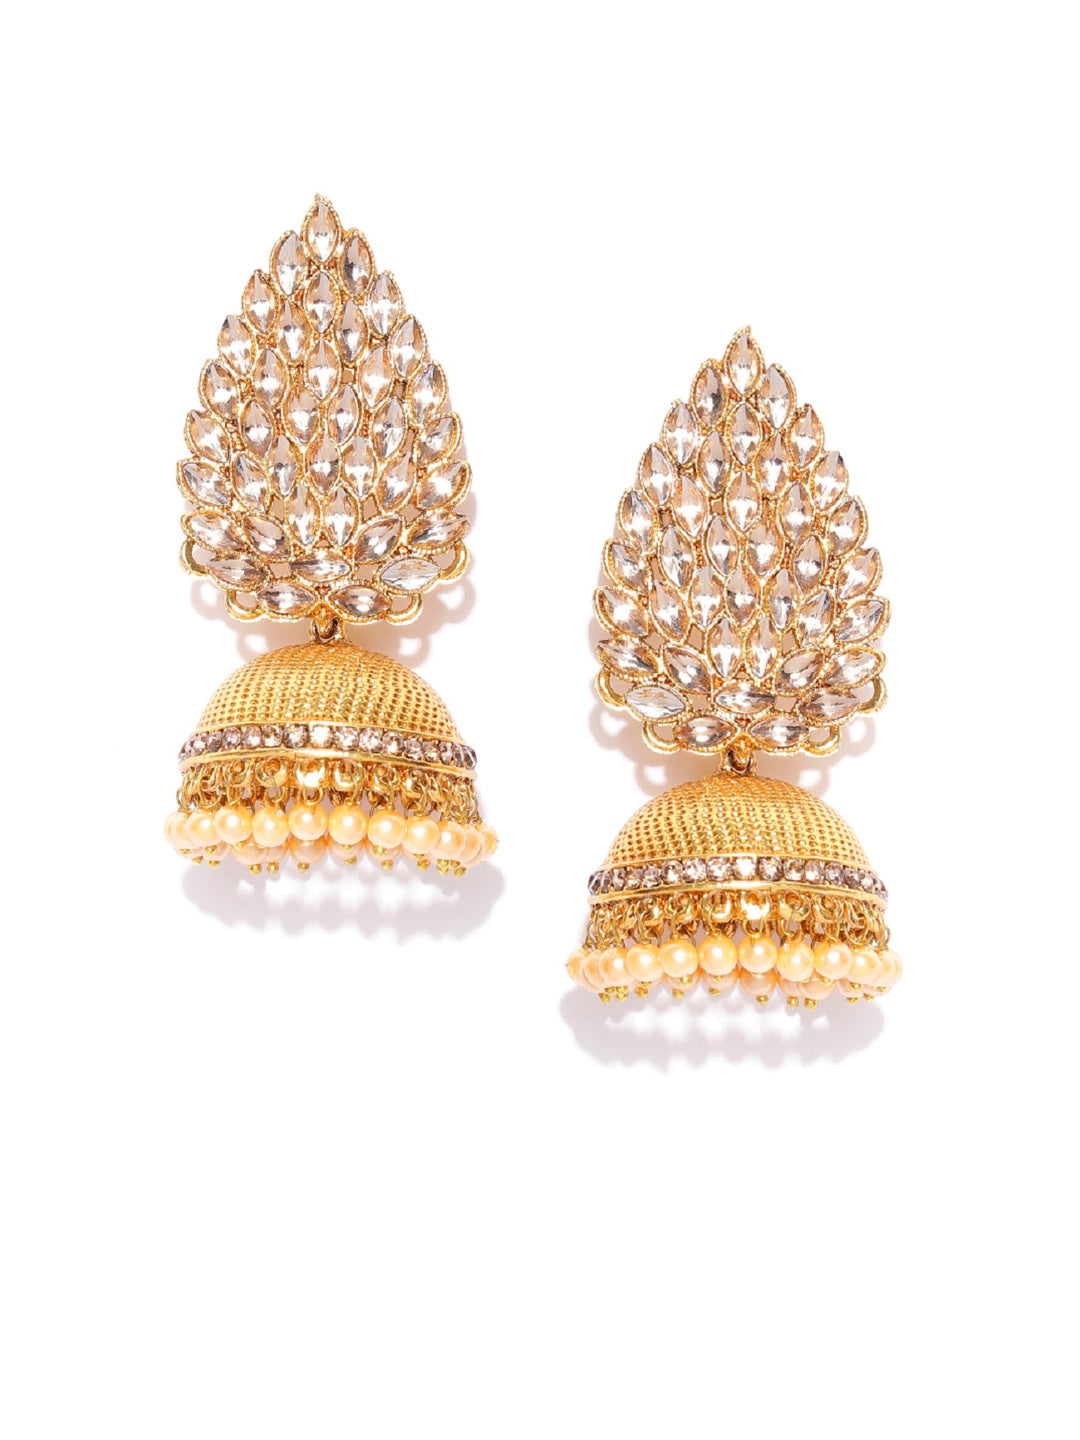 Leaf Design Gold Plated Stud Jhumka Earrings For Women And Girls